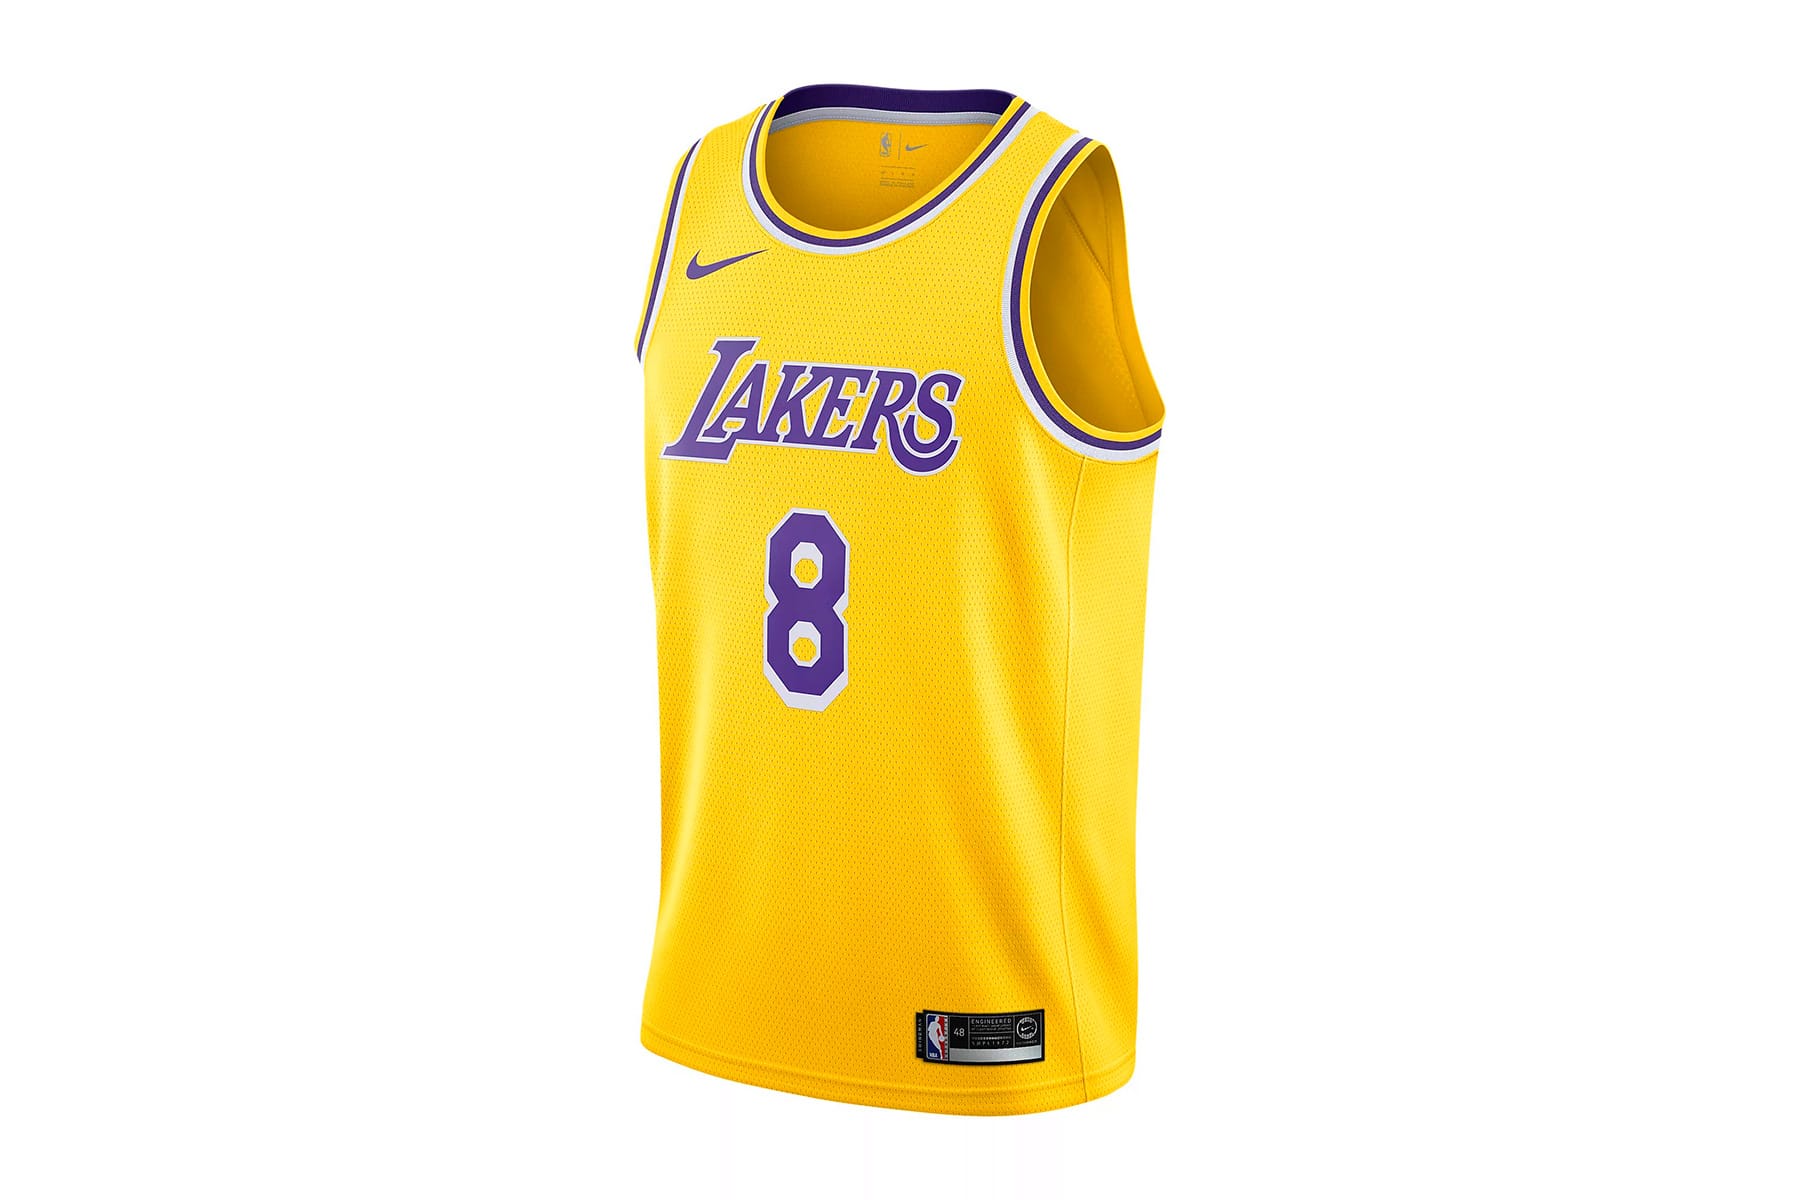 Embroidered Mesh Basketball Swingman Jersey 100% Polyester-XXXL XYFF Men ’s Basketball Jersey-Bryant- Los Angeles Lakers # 24 Jersey Black Gold Edition jersey 